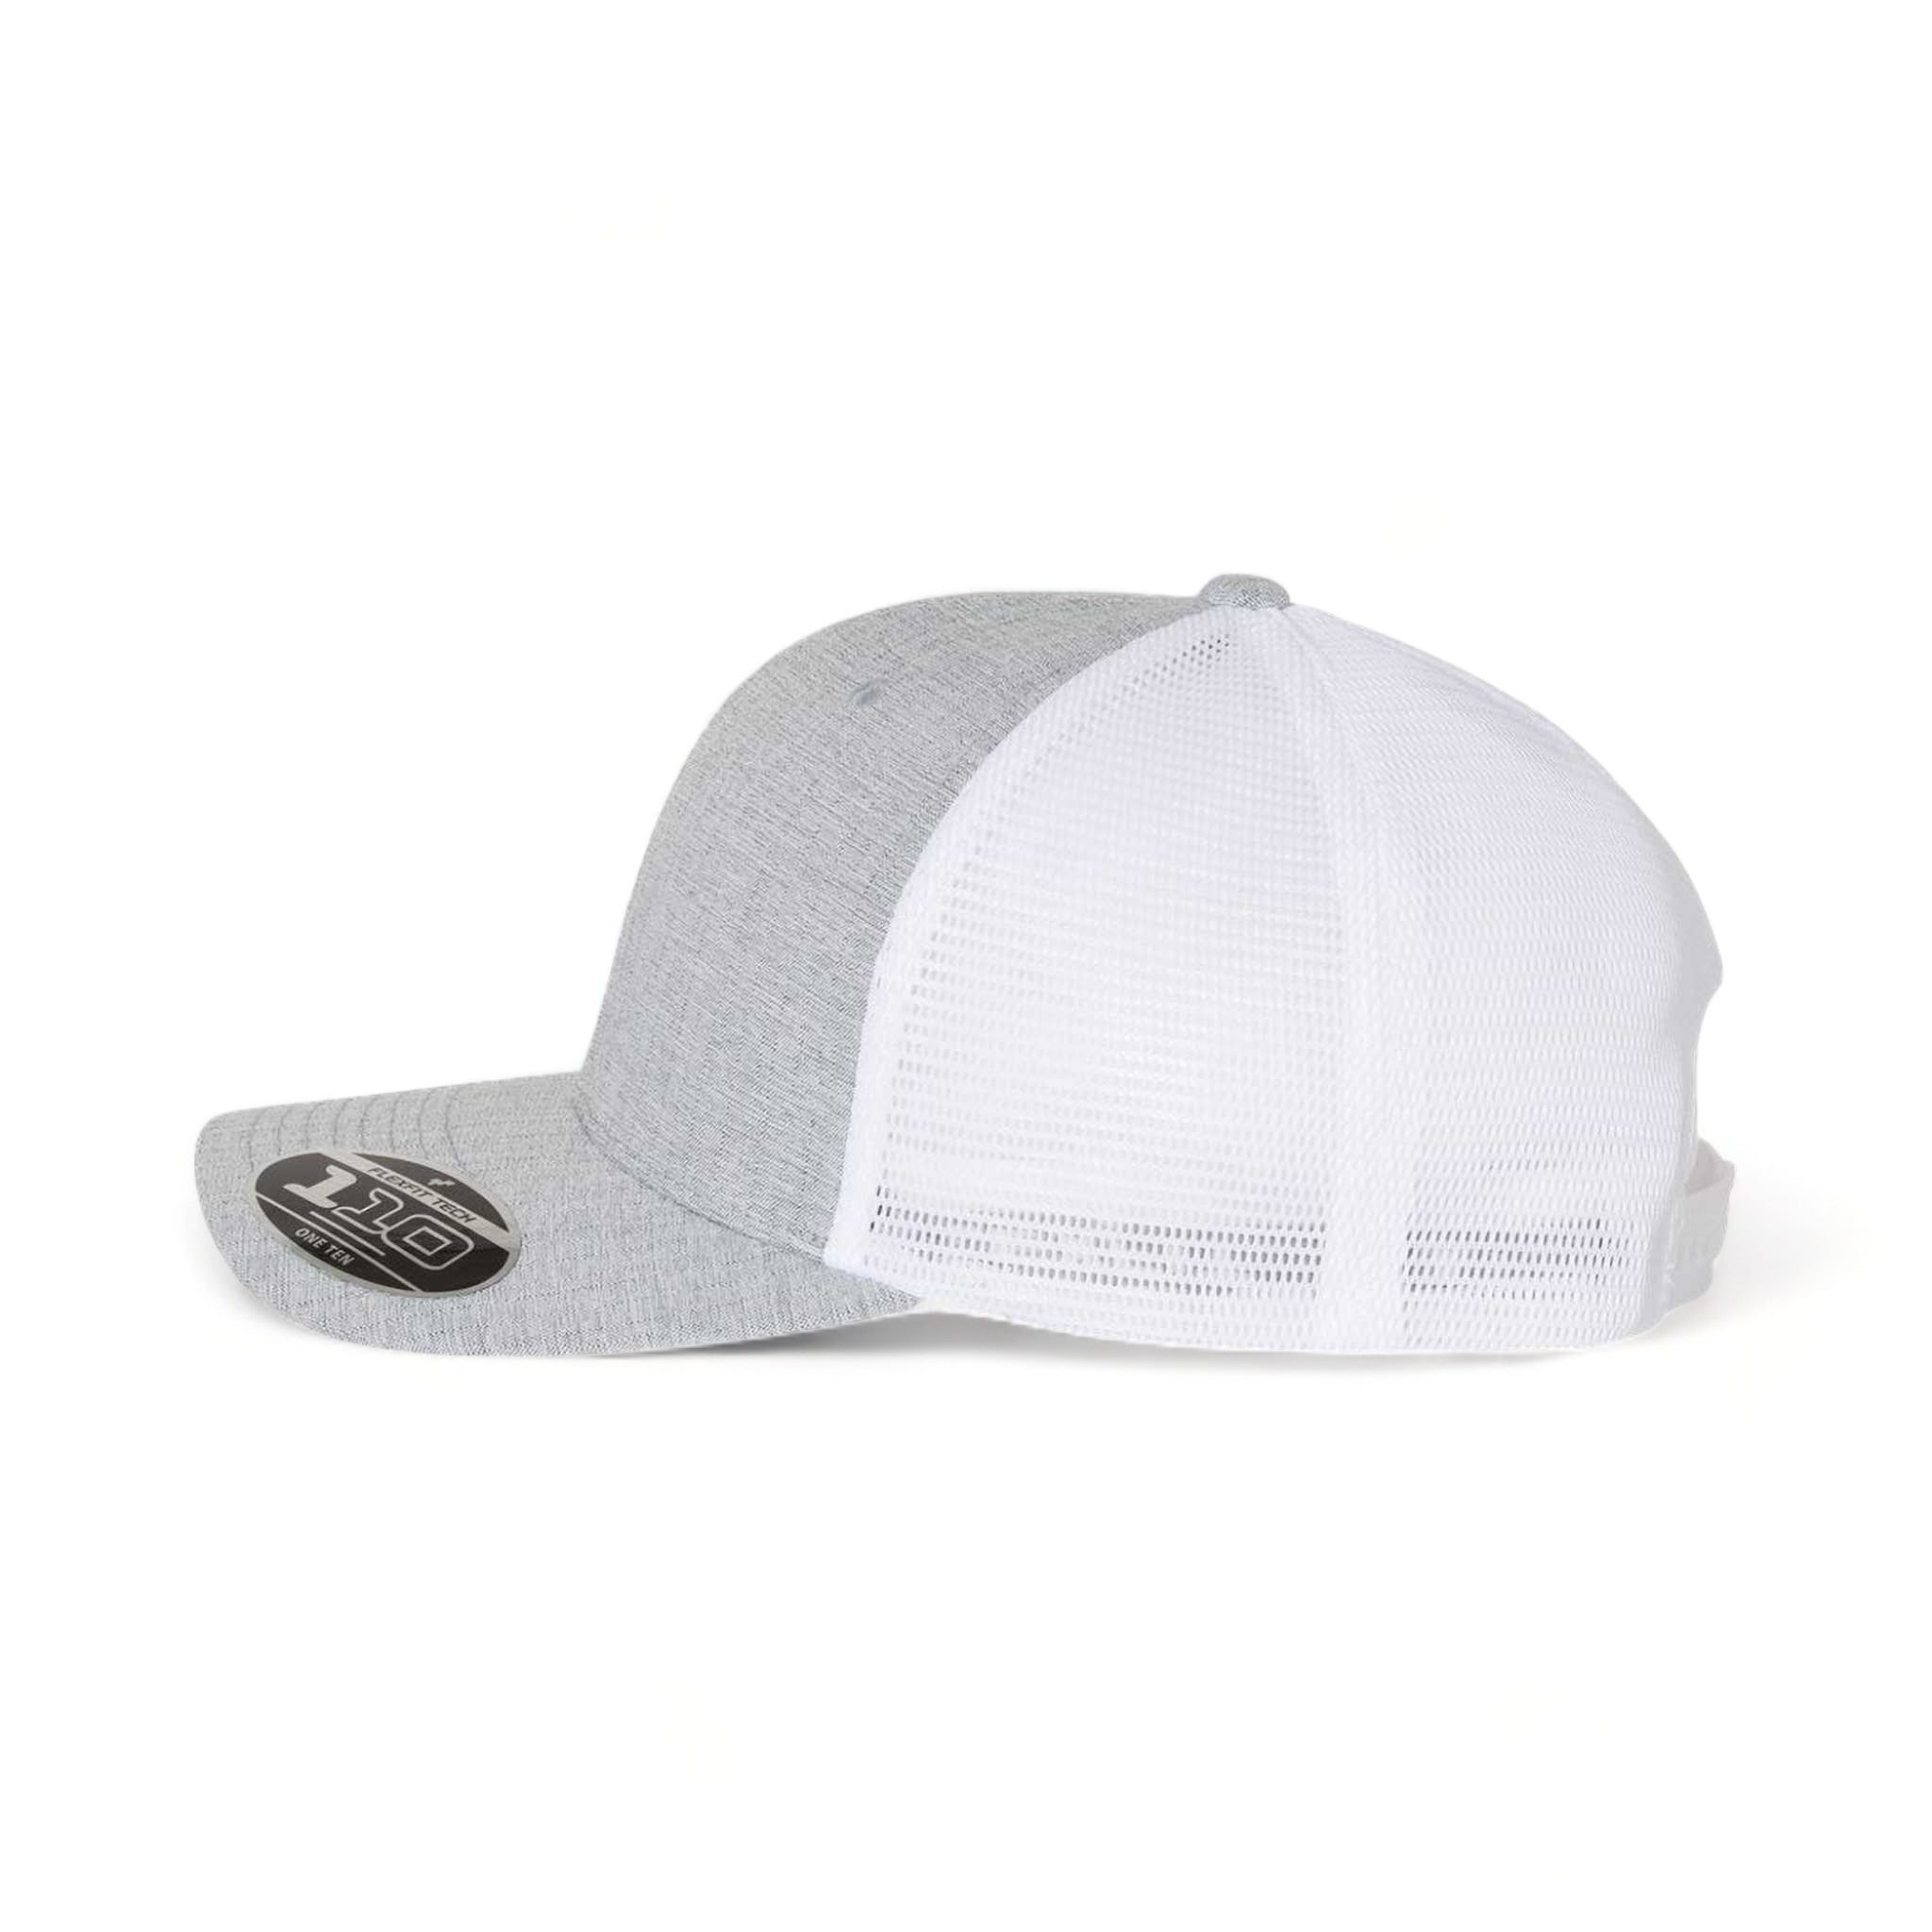 Side view of Flexfit 110M custom hat in melange silver and white